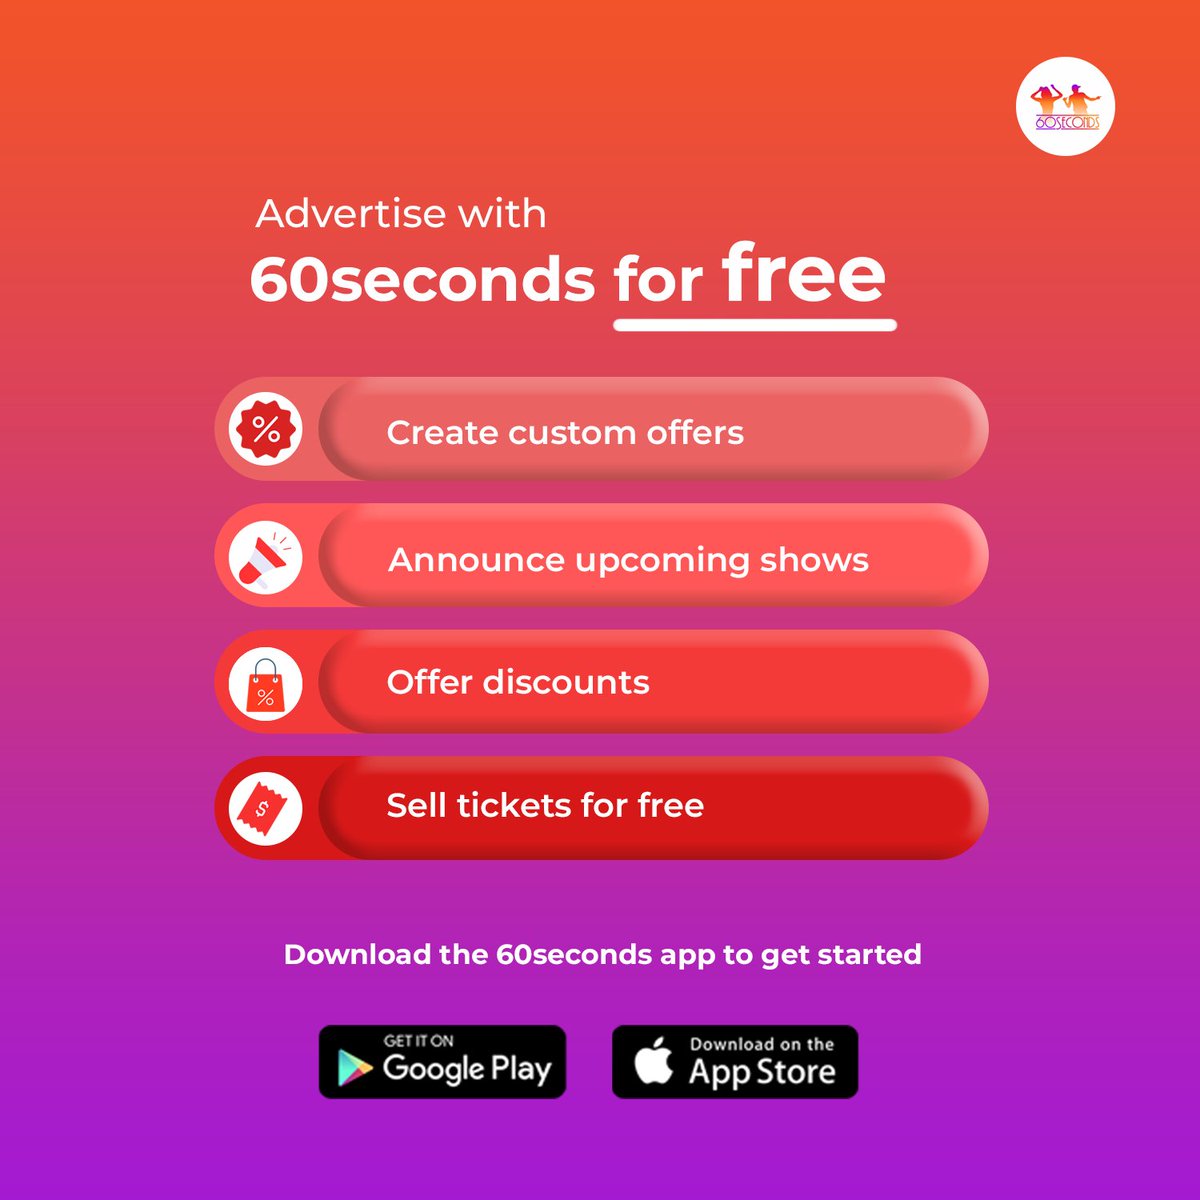 Club and Lounge owners get in here.
If you didn't know that you can advertise for free on 60Seconds app, now you do.

Download the app to get started here👉onelink.to/ue738r
 
#clubowner #loungeowner #clubmanager #nightparties #bestclub #bestloungeintown #bestclubintown